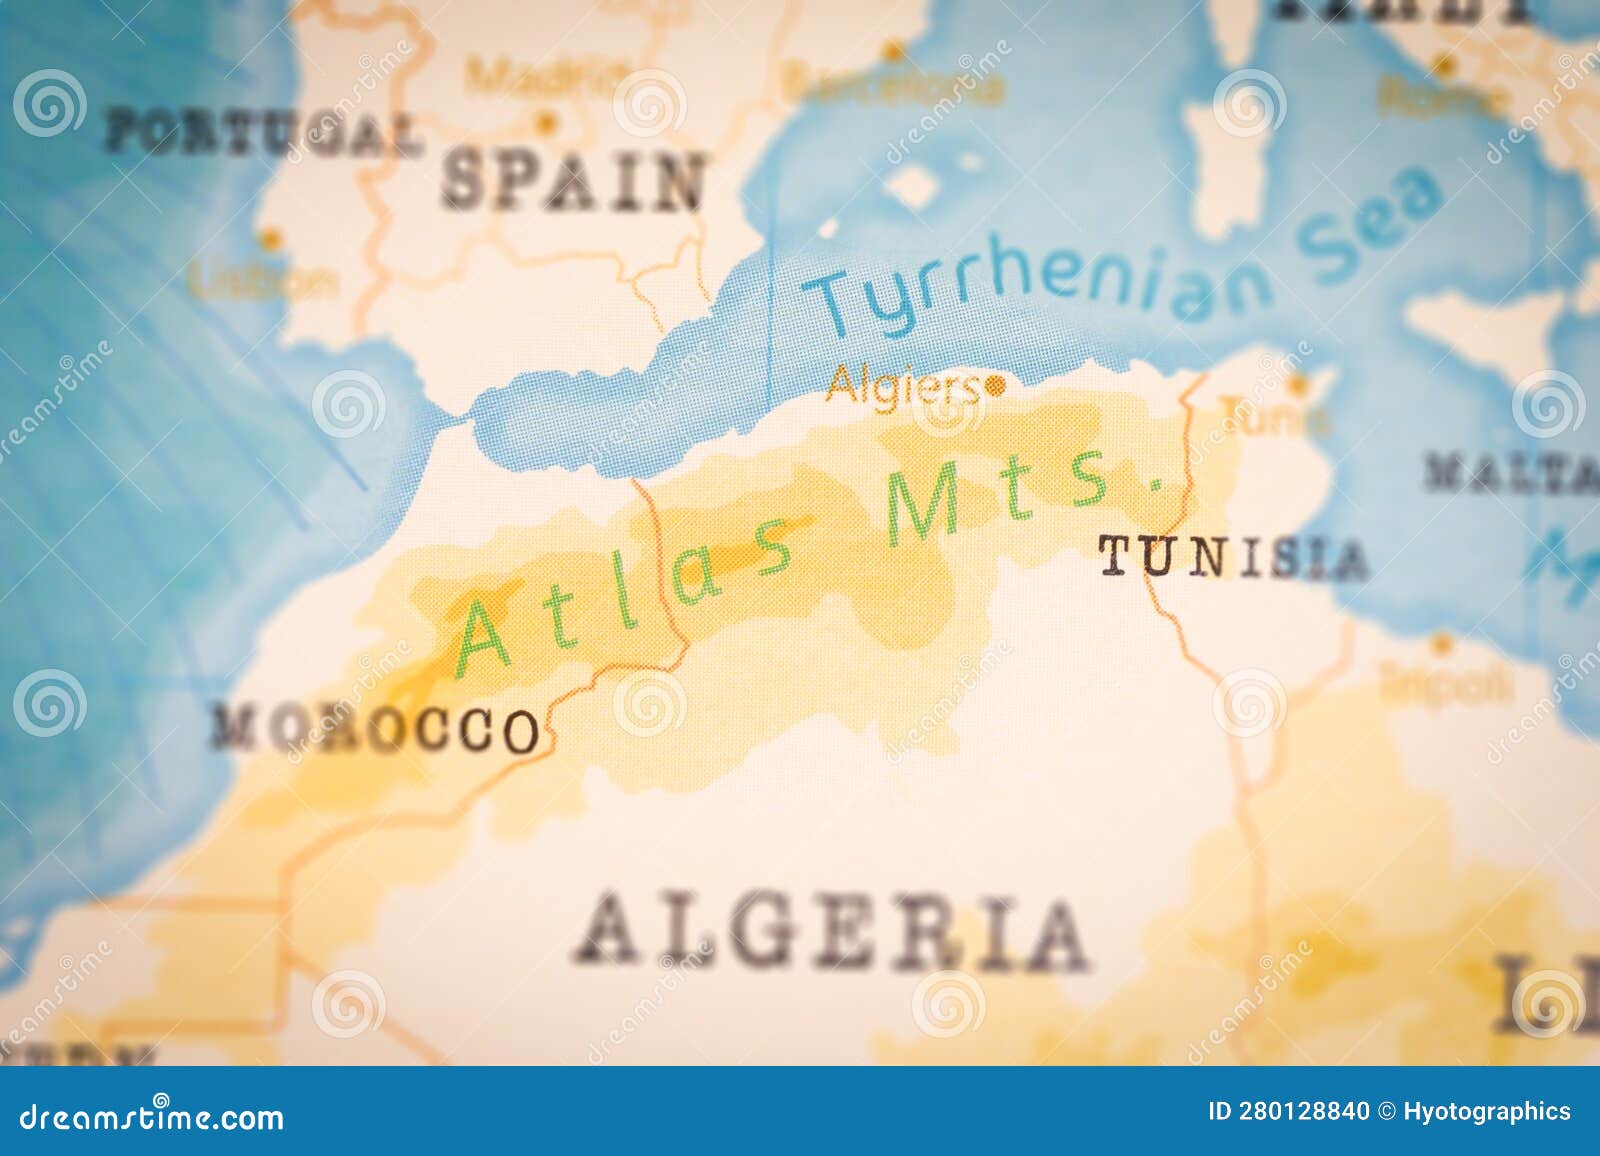 Where Is The Atlas Mountains On A Map 